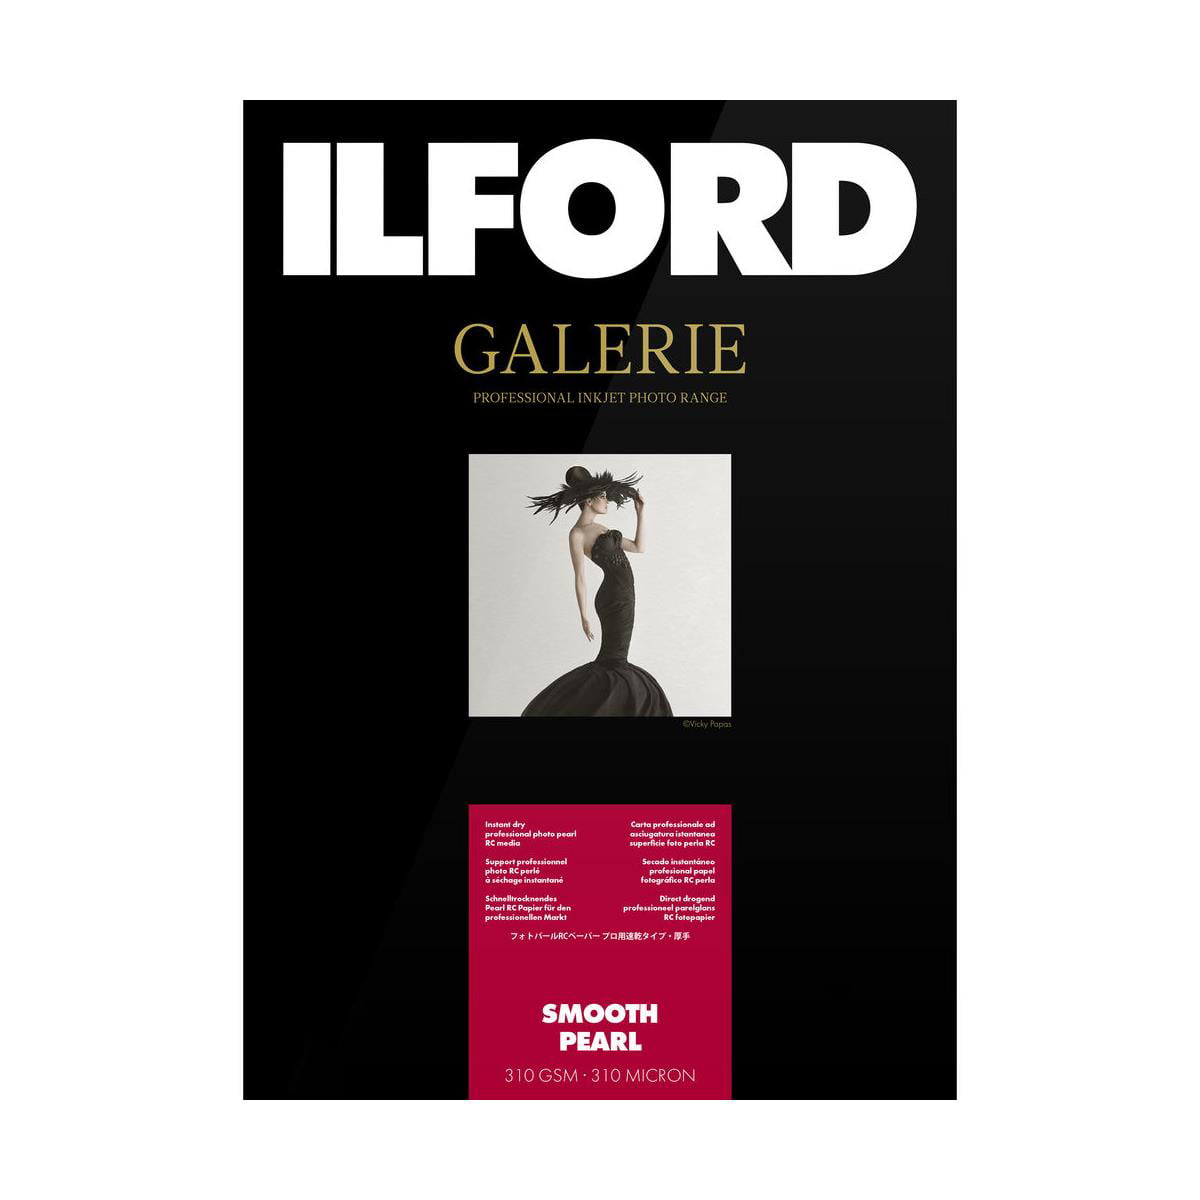 Ilford Galerie Smooth Pearl 8 1/2 x 11 inch Inkjet Photo Paper 100 Sheets 1